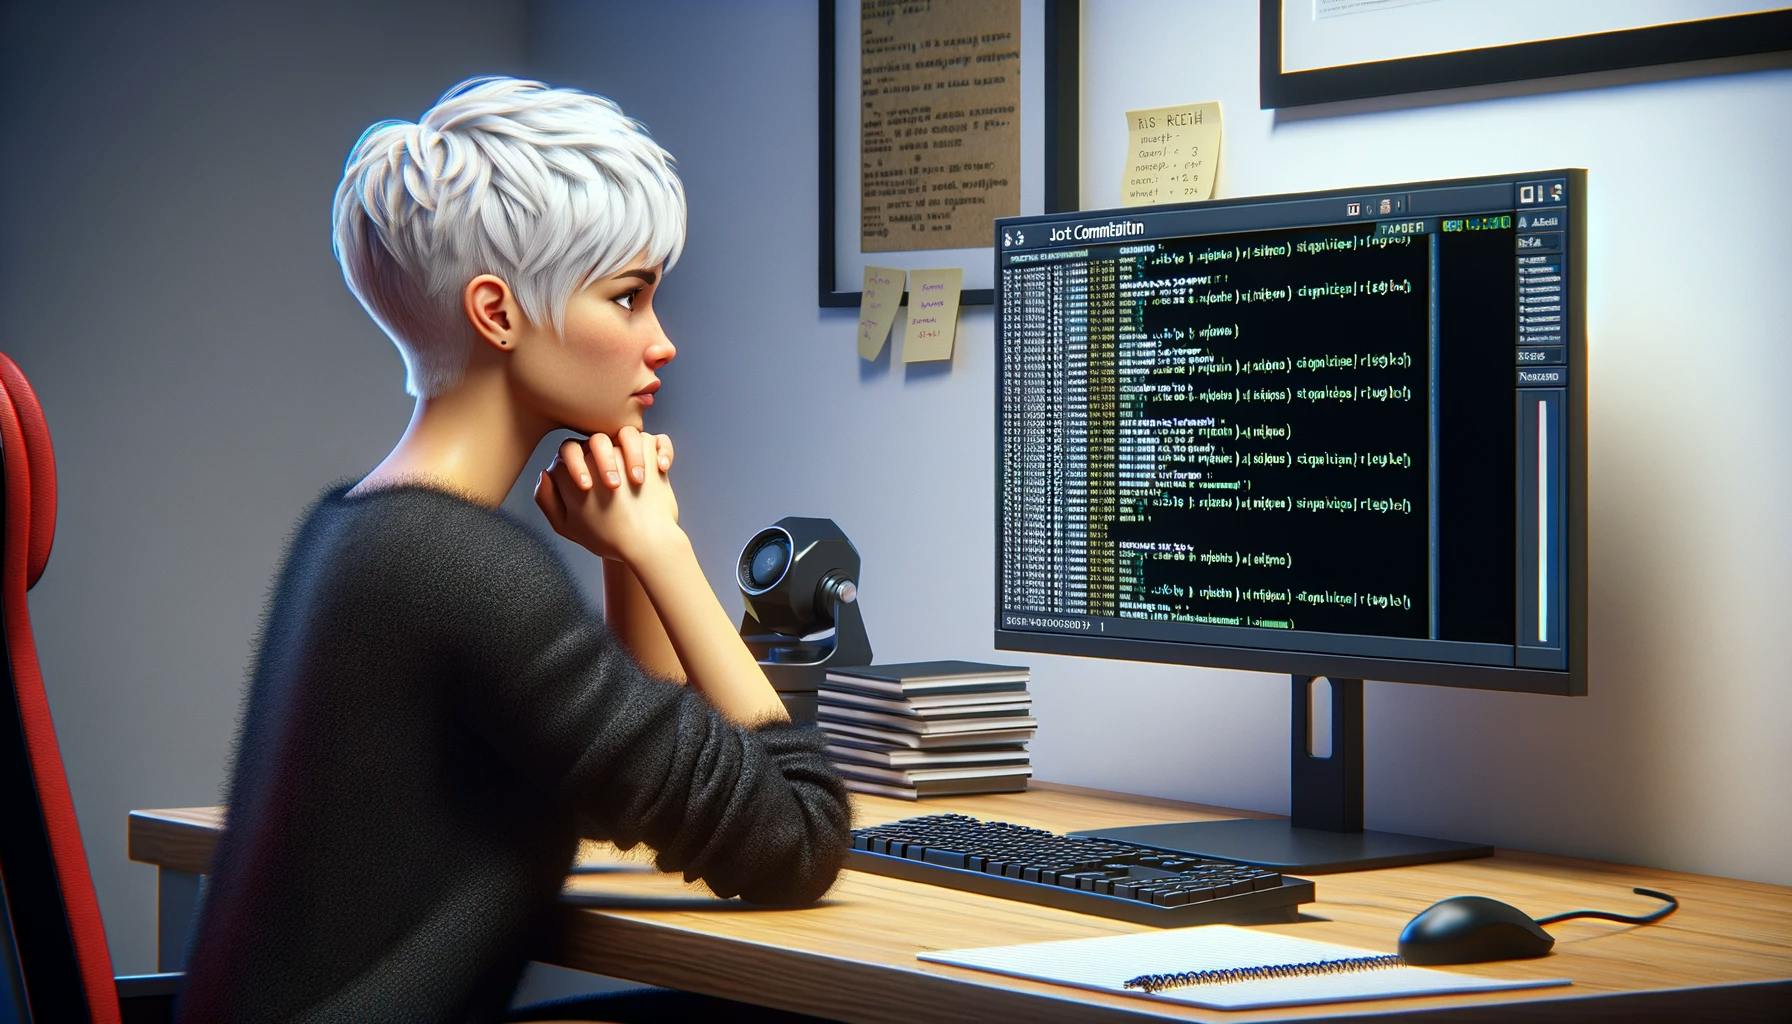 A woman with a pixie haircut looking at a computer in an office environment, waiting for her code to compile.